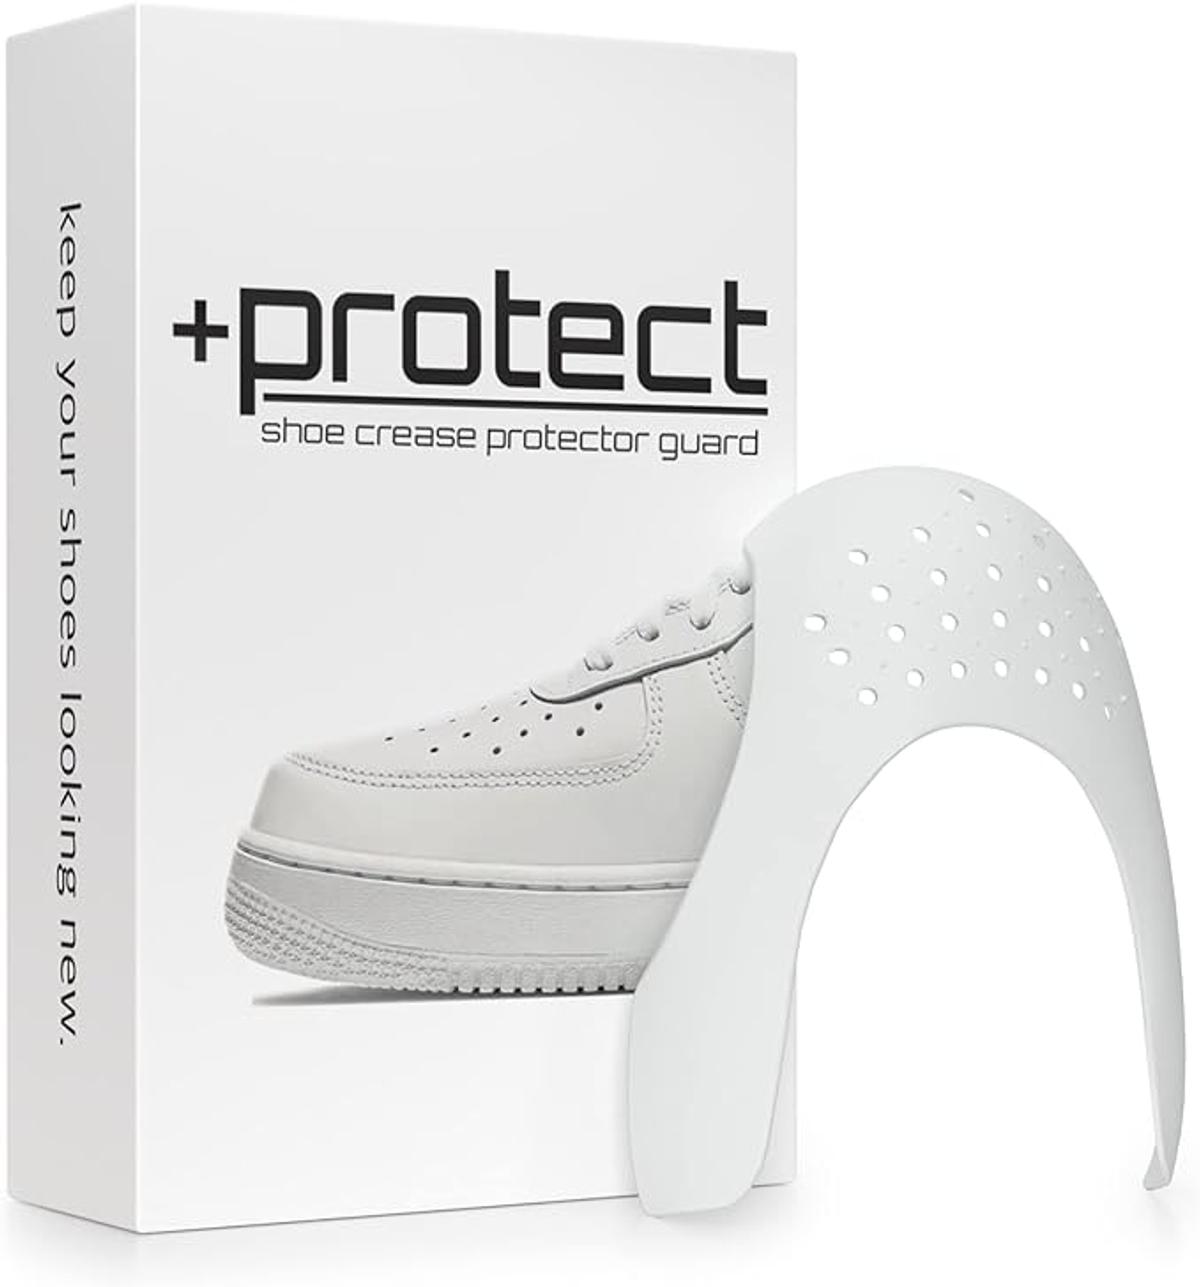 +Protect Shoe Crease Protector 